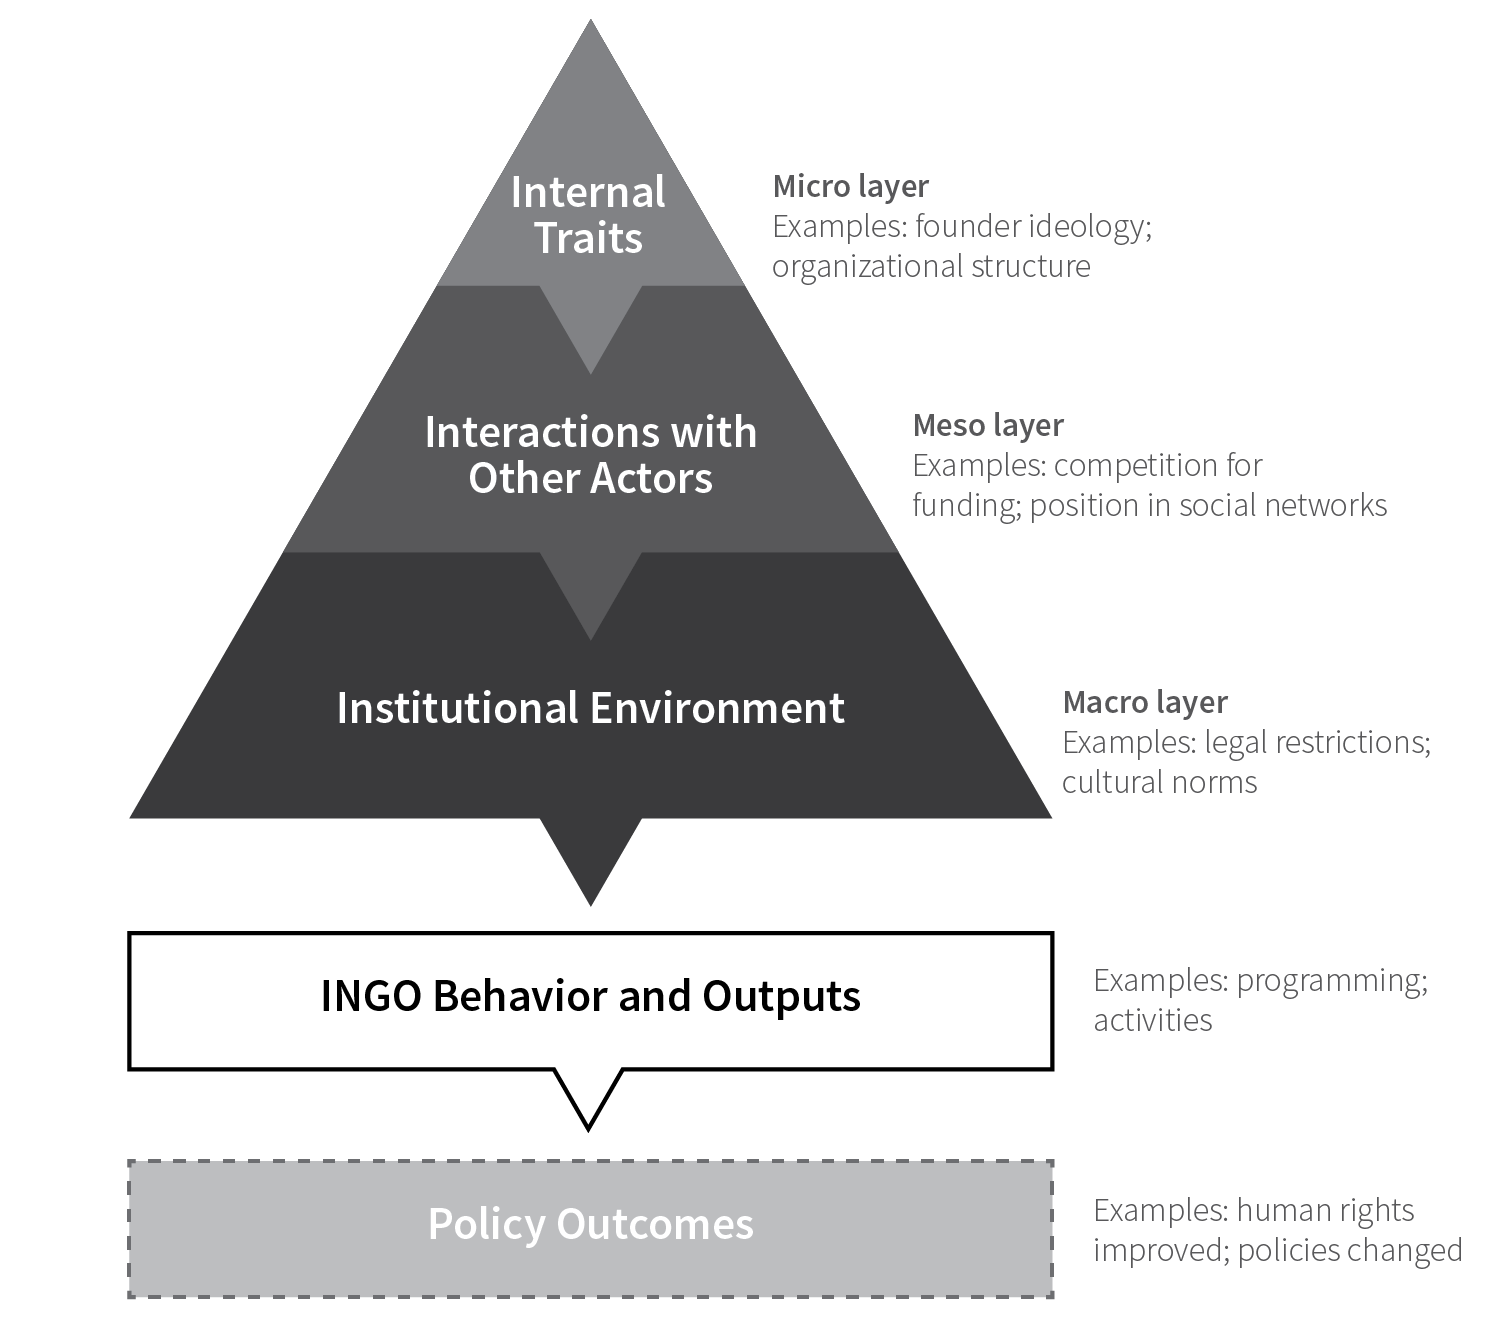 A Unified Framework for Analyzing INGO Behavior and Outputs